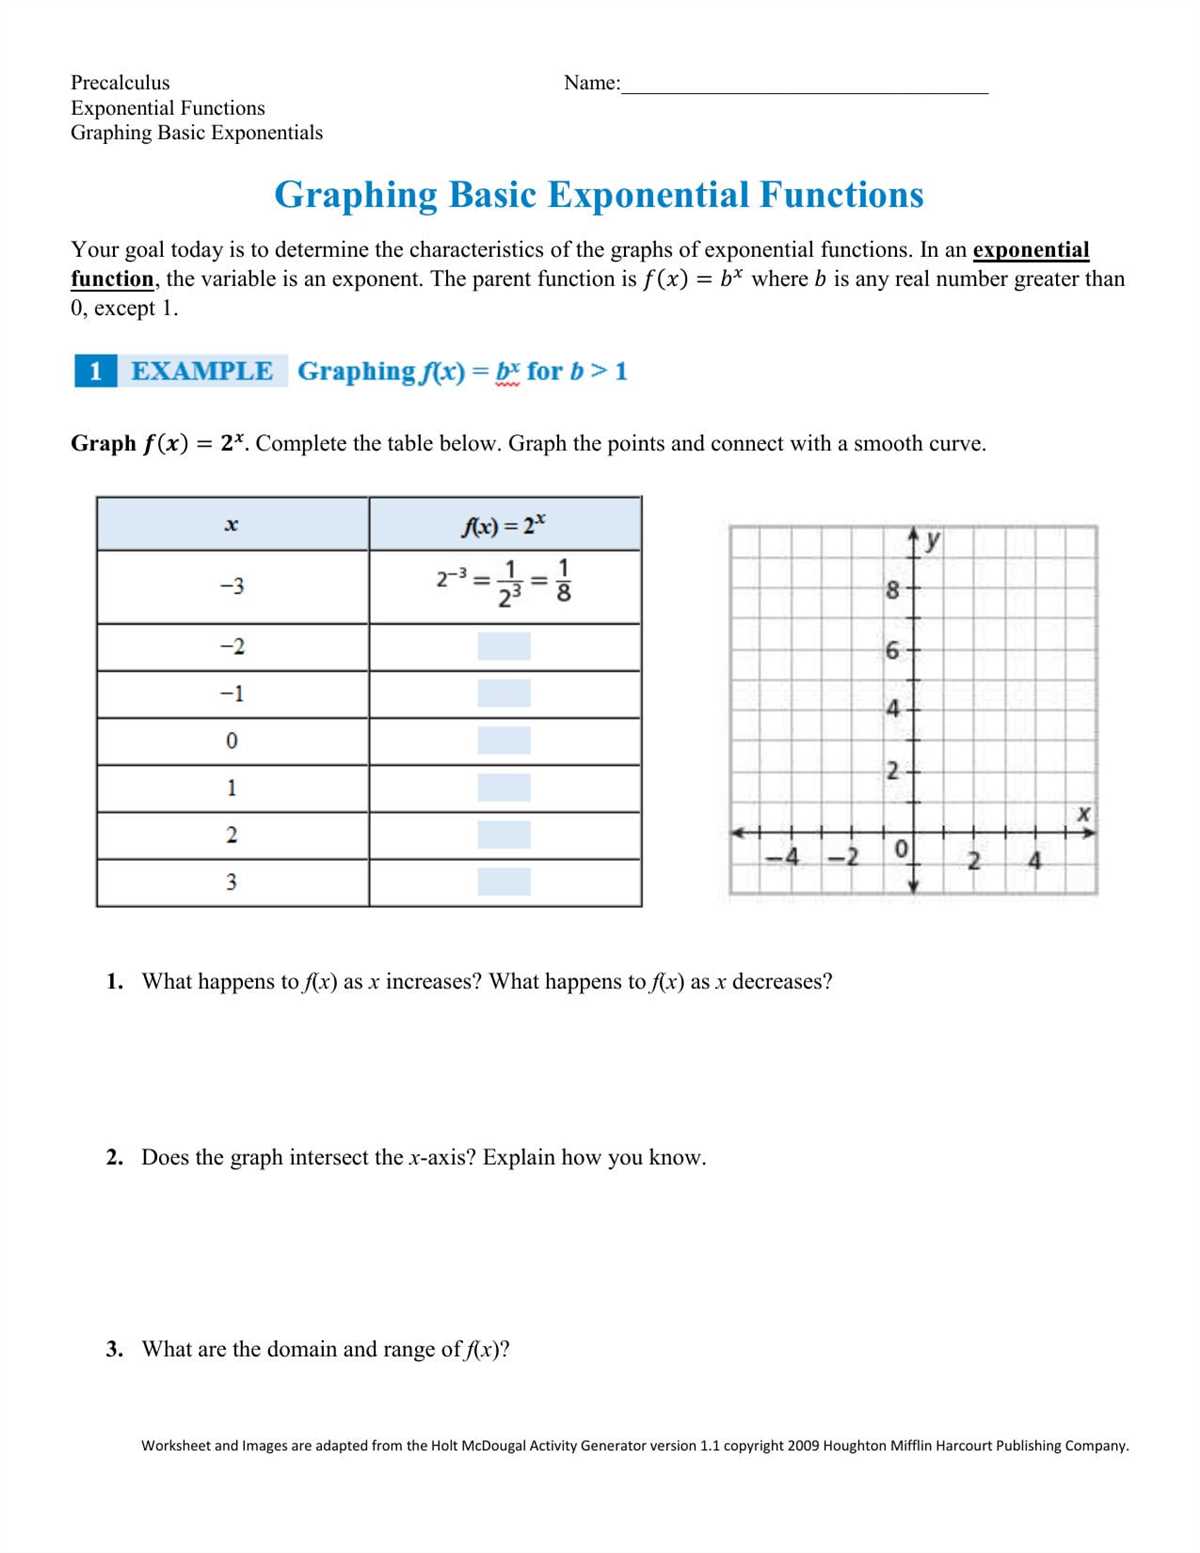 Evaluating exponential functions worksheet answers